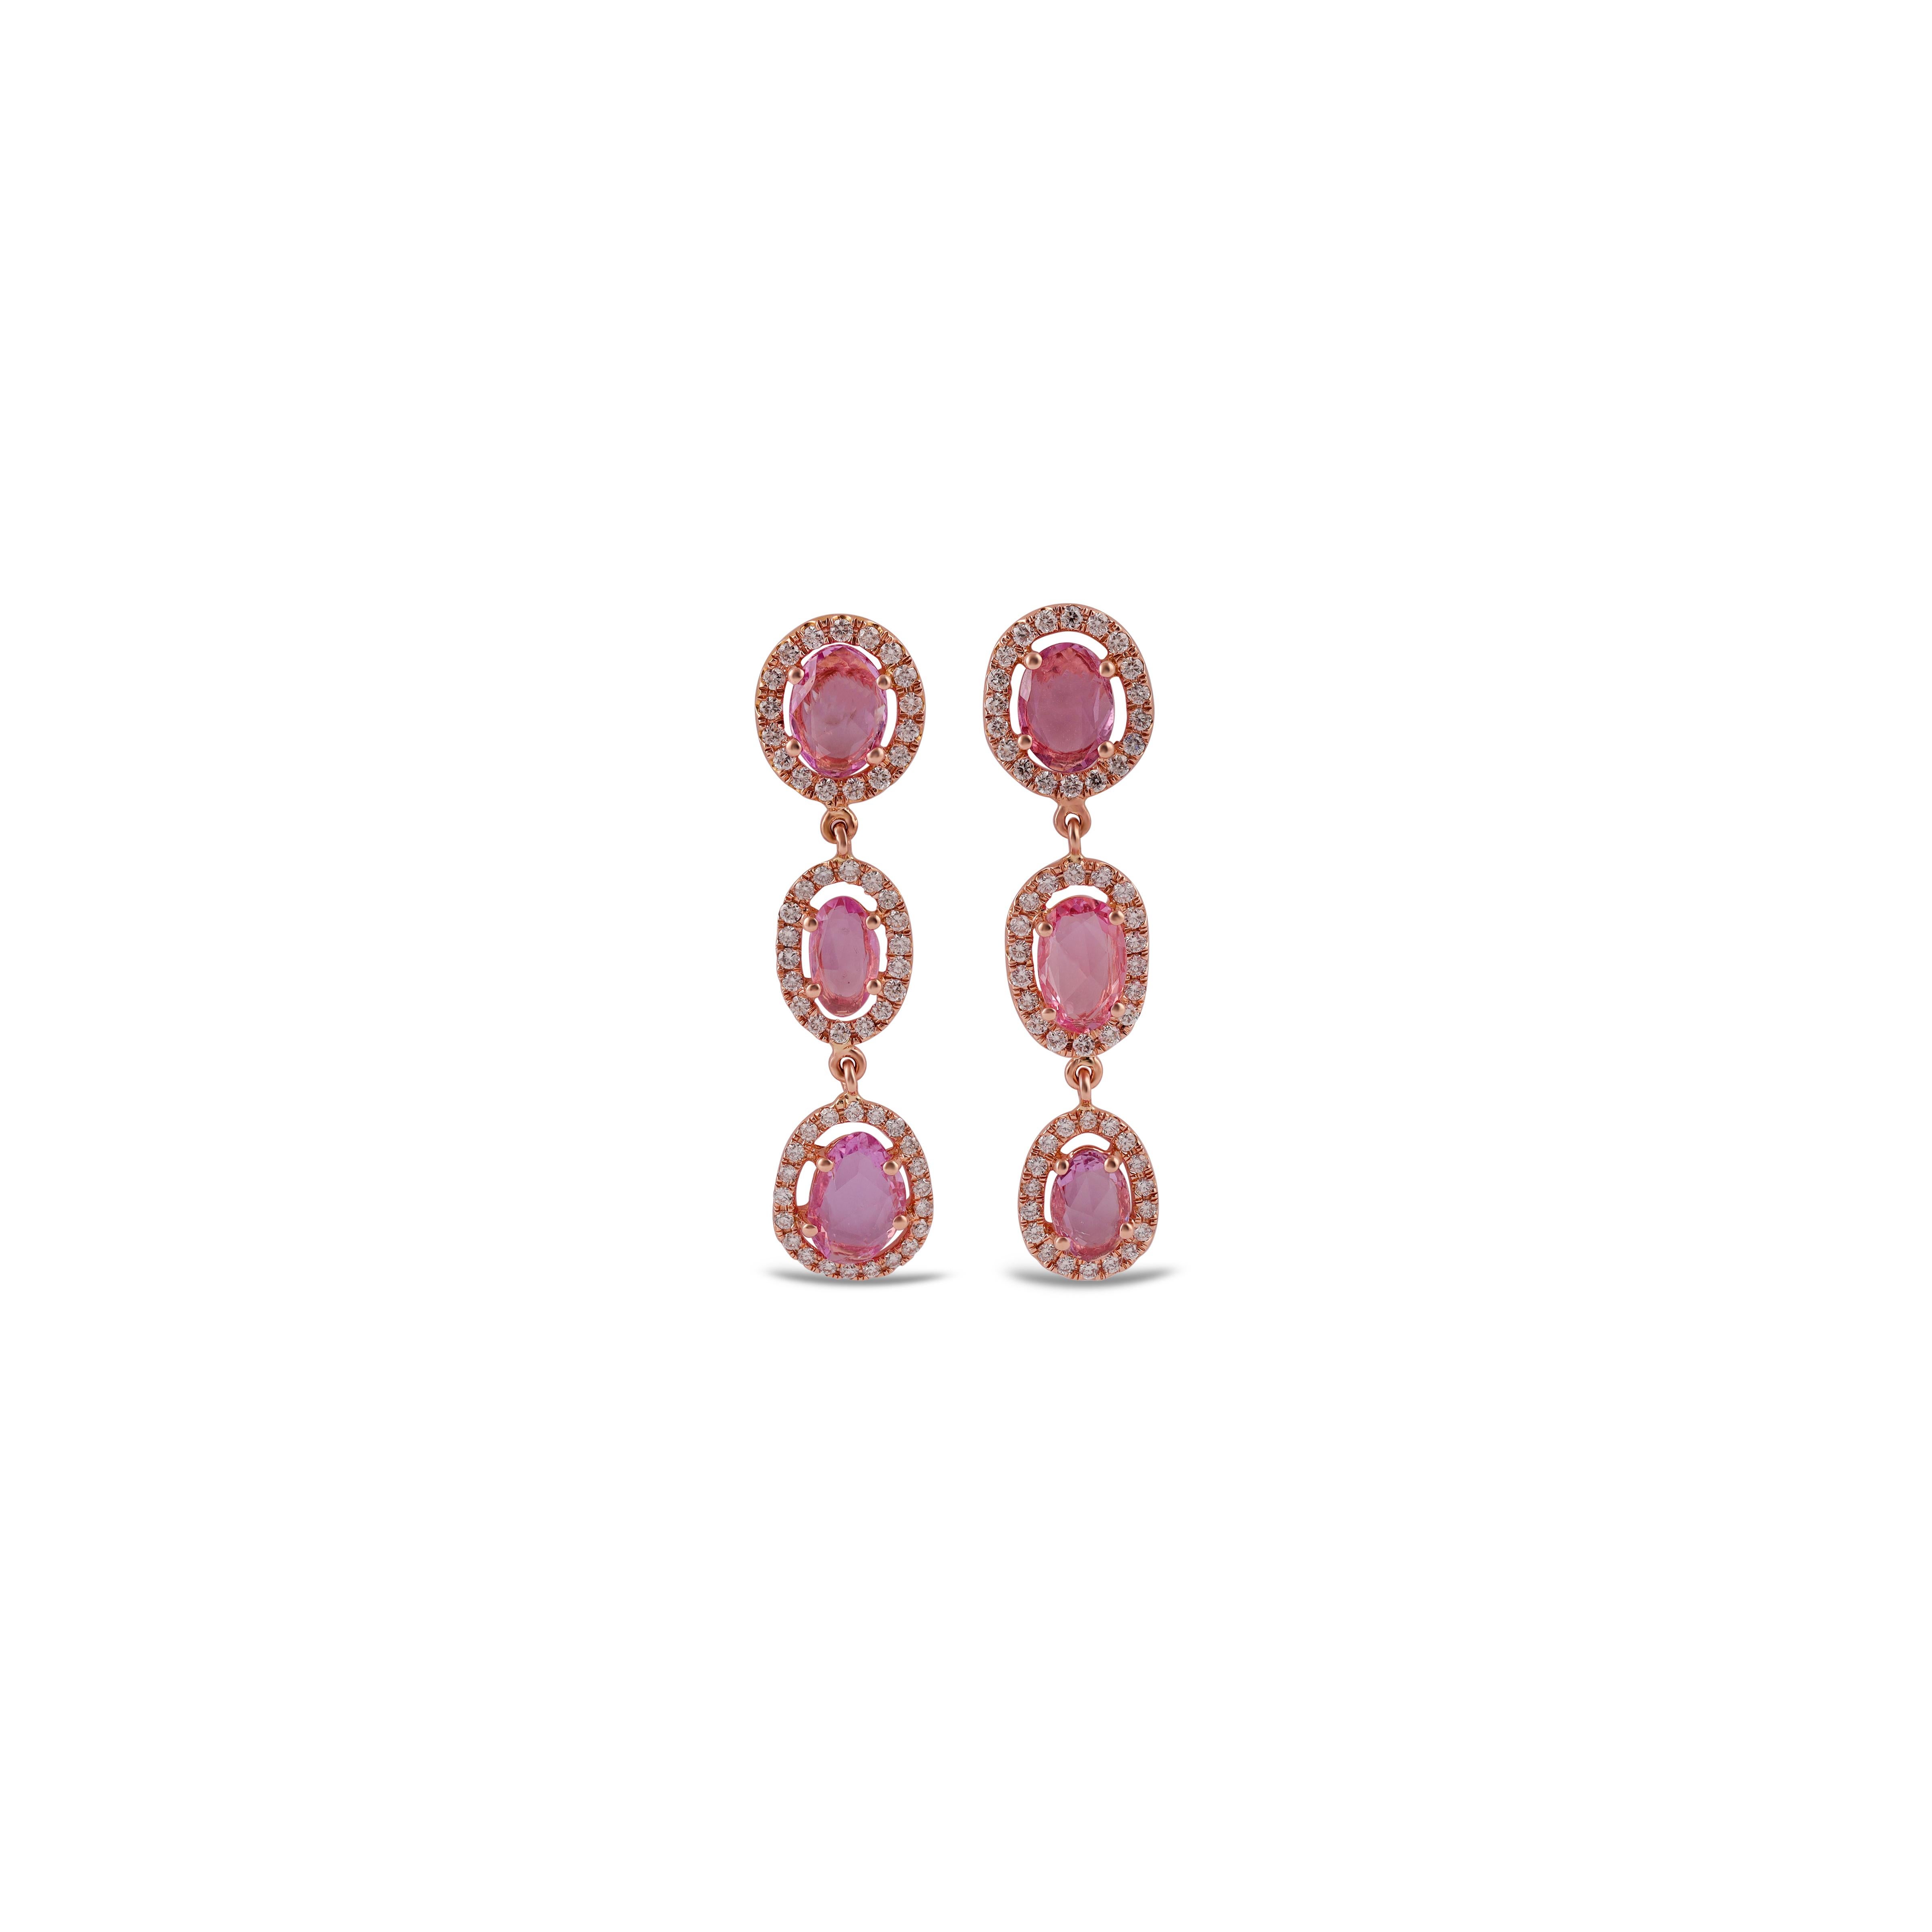 These are an exclusive earrings with Pink sapphire & diamonds features 6 pieces of Sapphire weight 2.86 carats, surrounded with 111 pieces of round brilliant cut of diamonds weight 0.69 carats, These entire earrings are studded in 18k rose Gold.